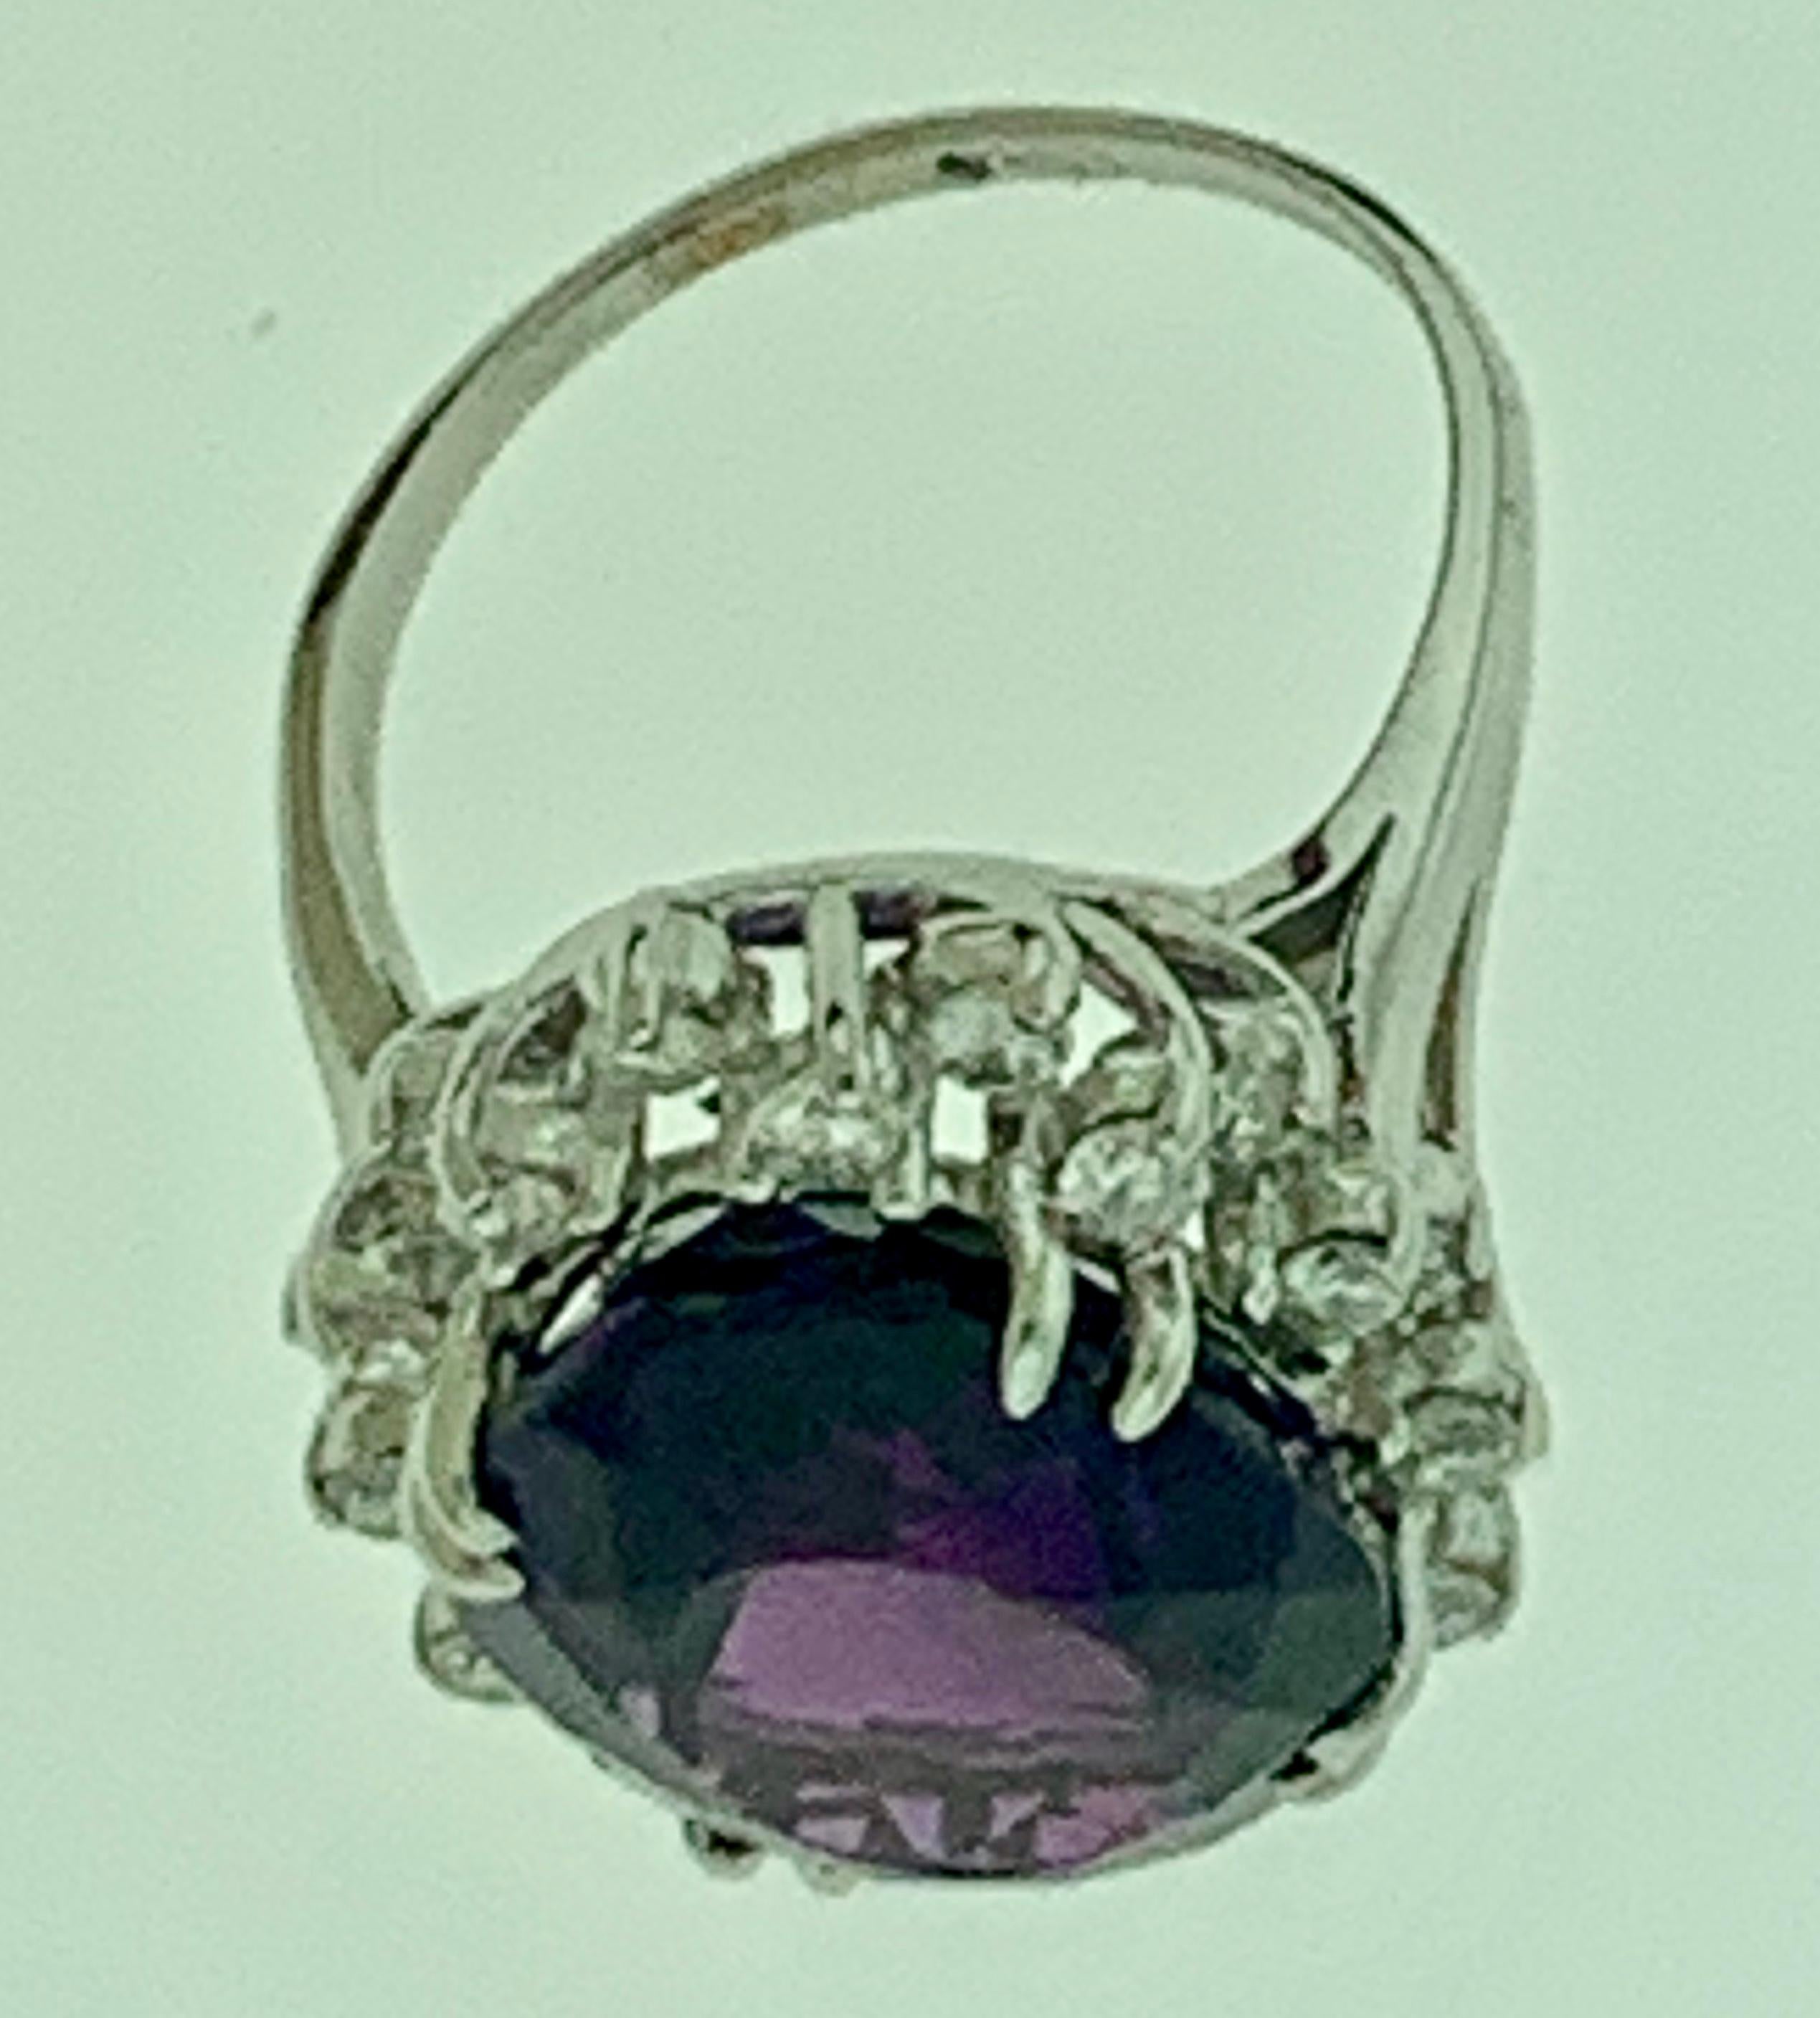 12.5 Carat Amethyst and Diamond Cocktail Ring in 14 Karat White Gold 1970s For Sale 7